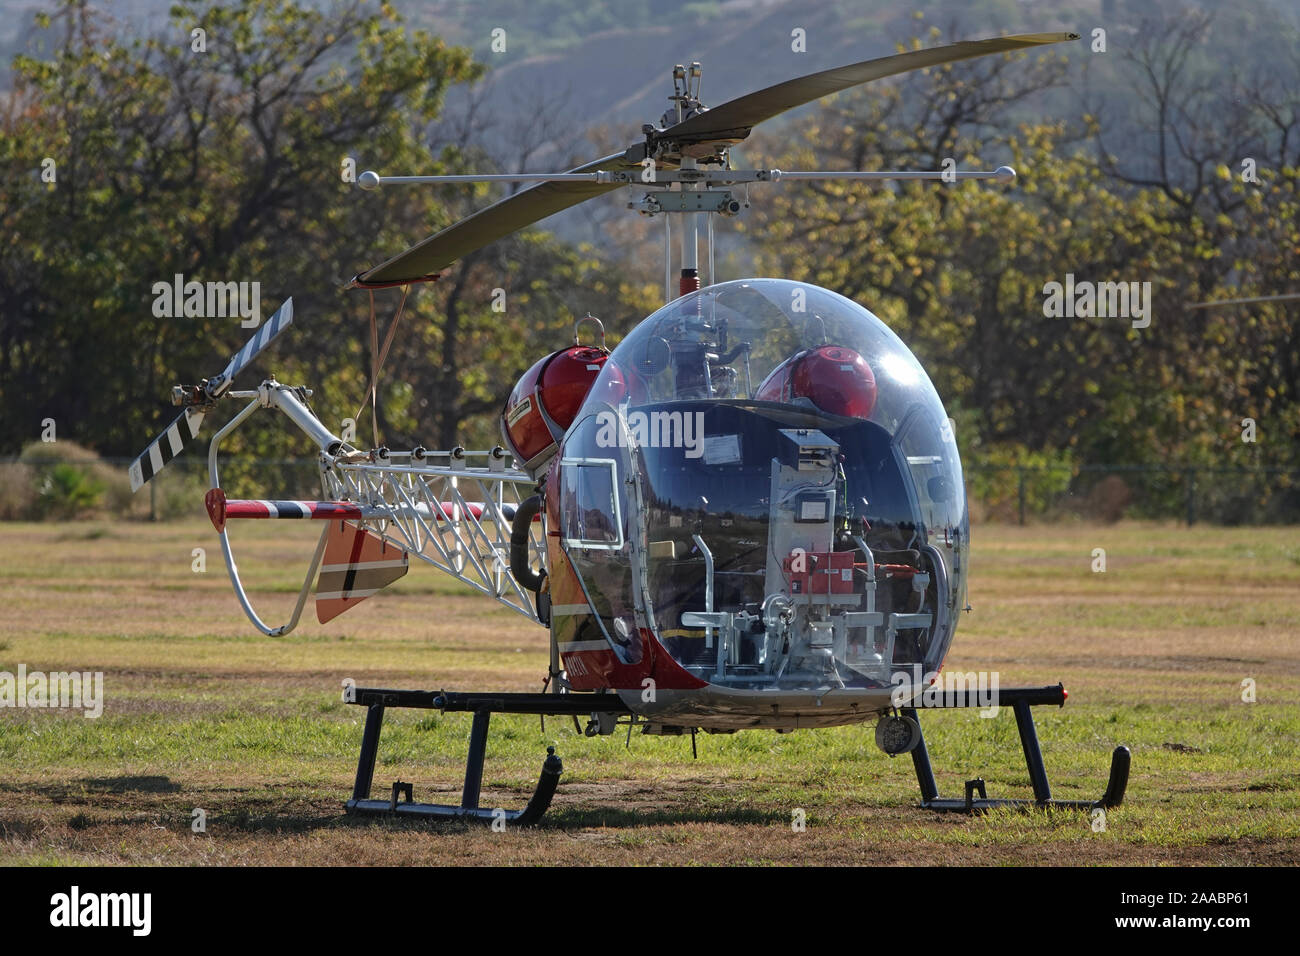 Sylmar, CA / USA - Nov. 9, 2019: A 1950 Bell 47D-1 helicopter is shown on display at the annual American Heroes Air Show in Los Angeles. Stock Photo